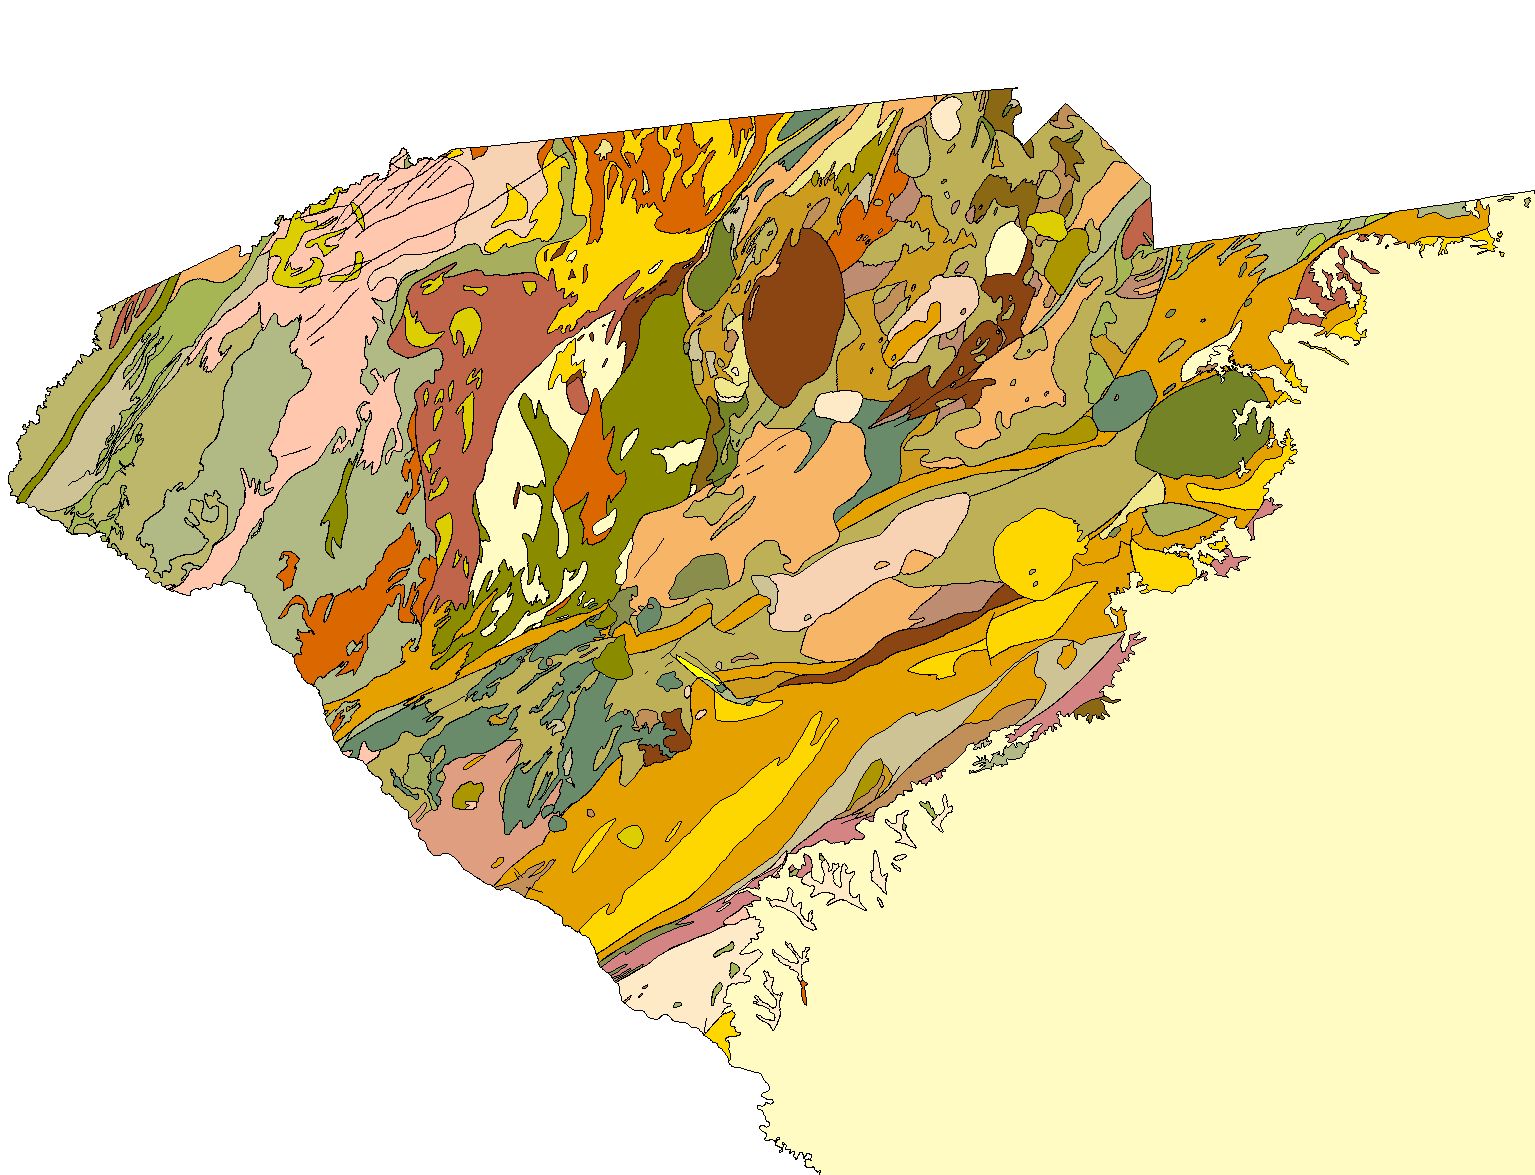 Index map showing geology
of coverage area in South Carolina